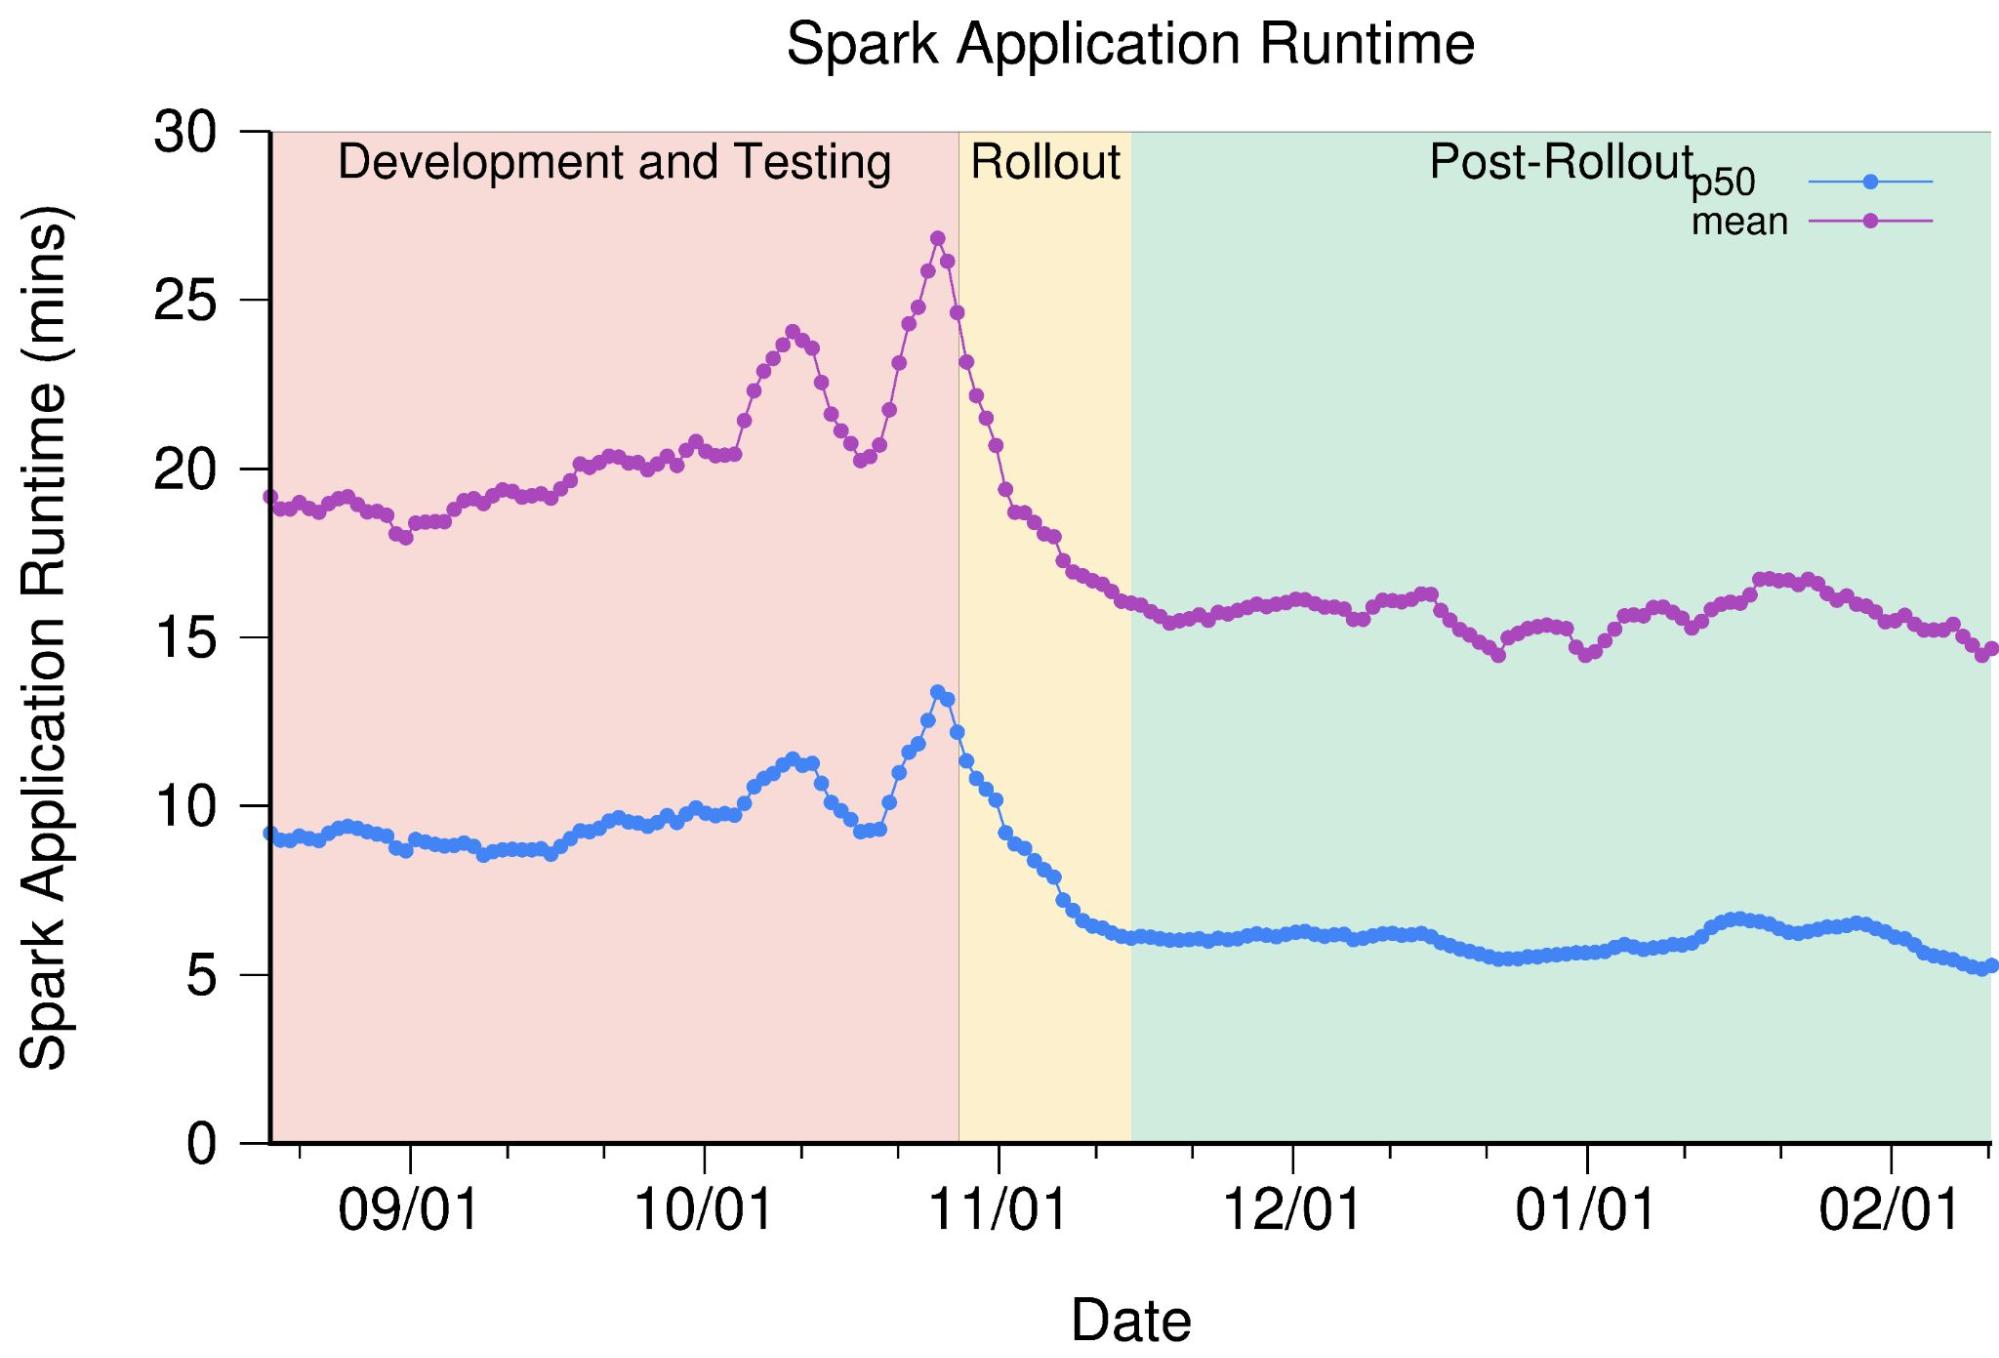 Chart that shows the Spark application runtime over a six month period